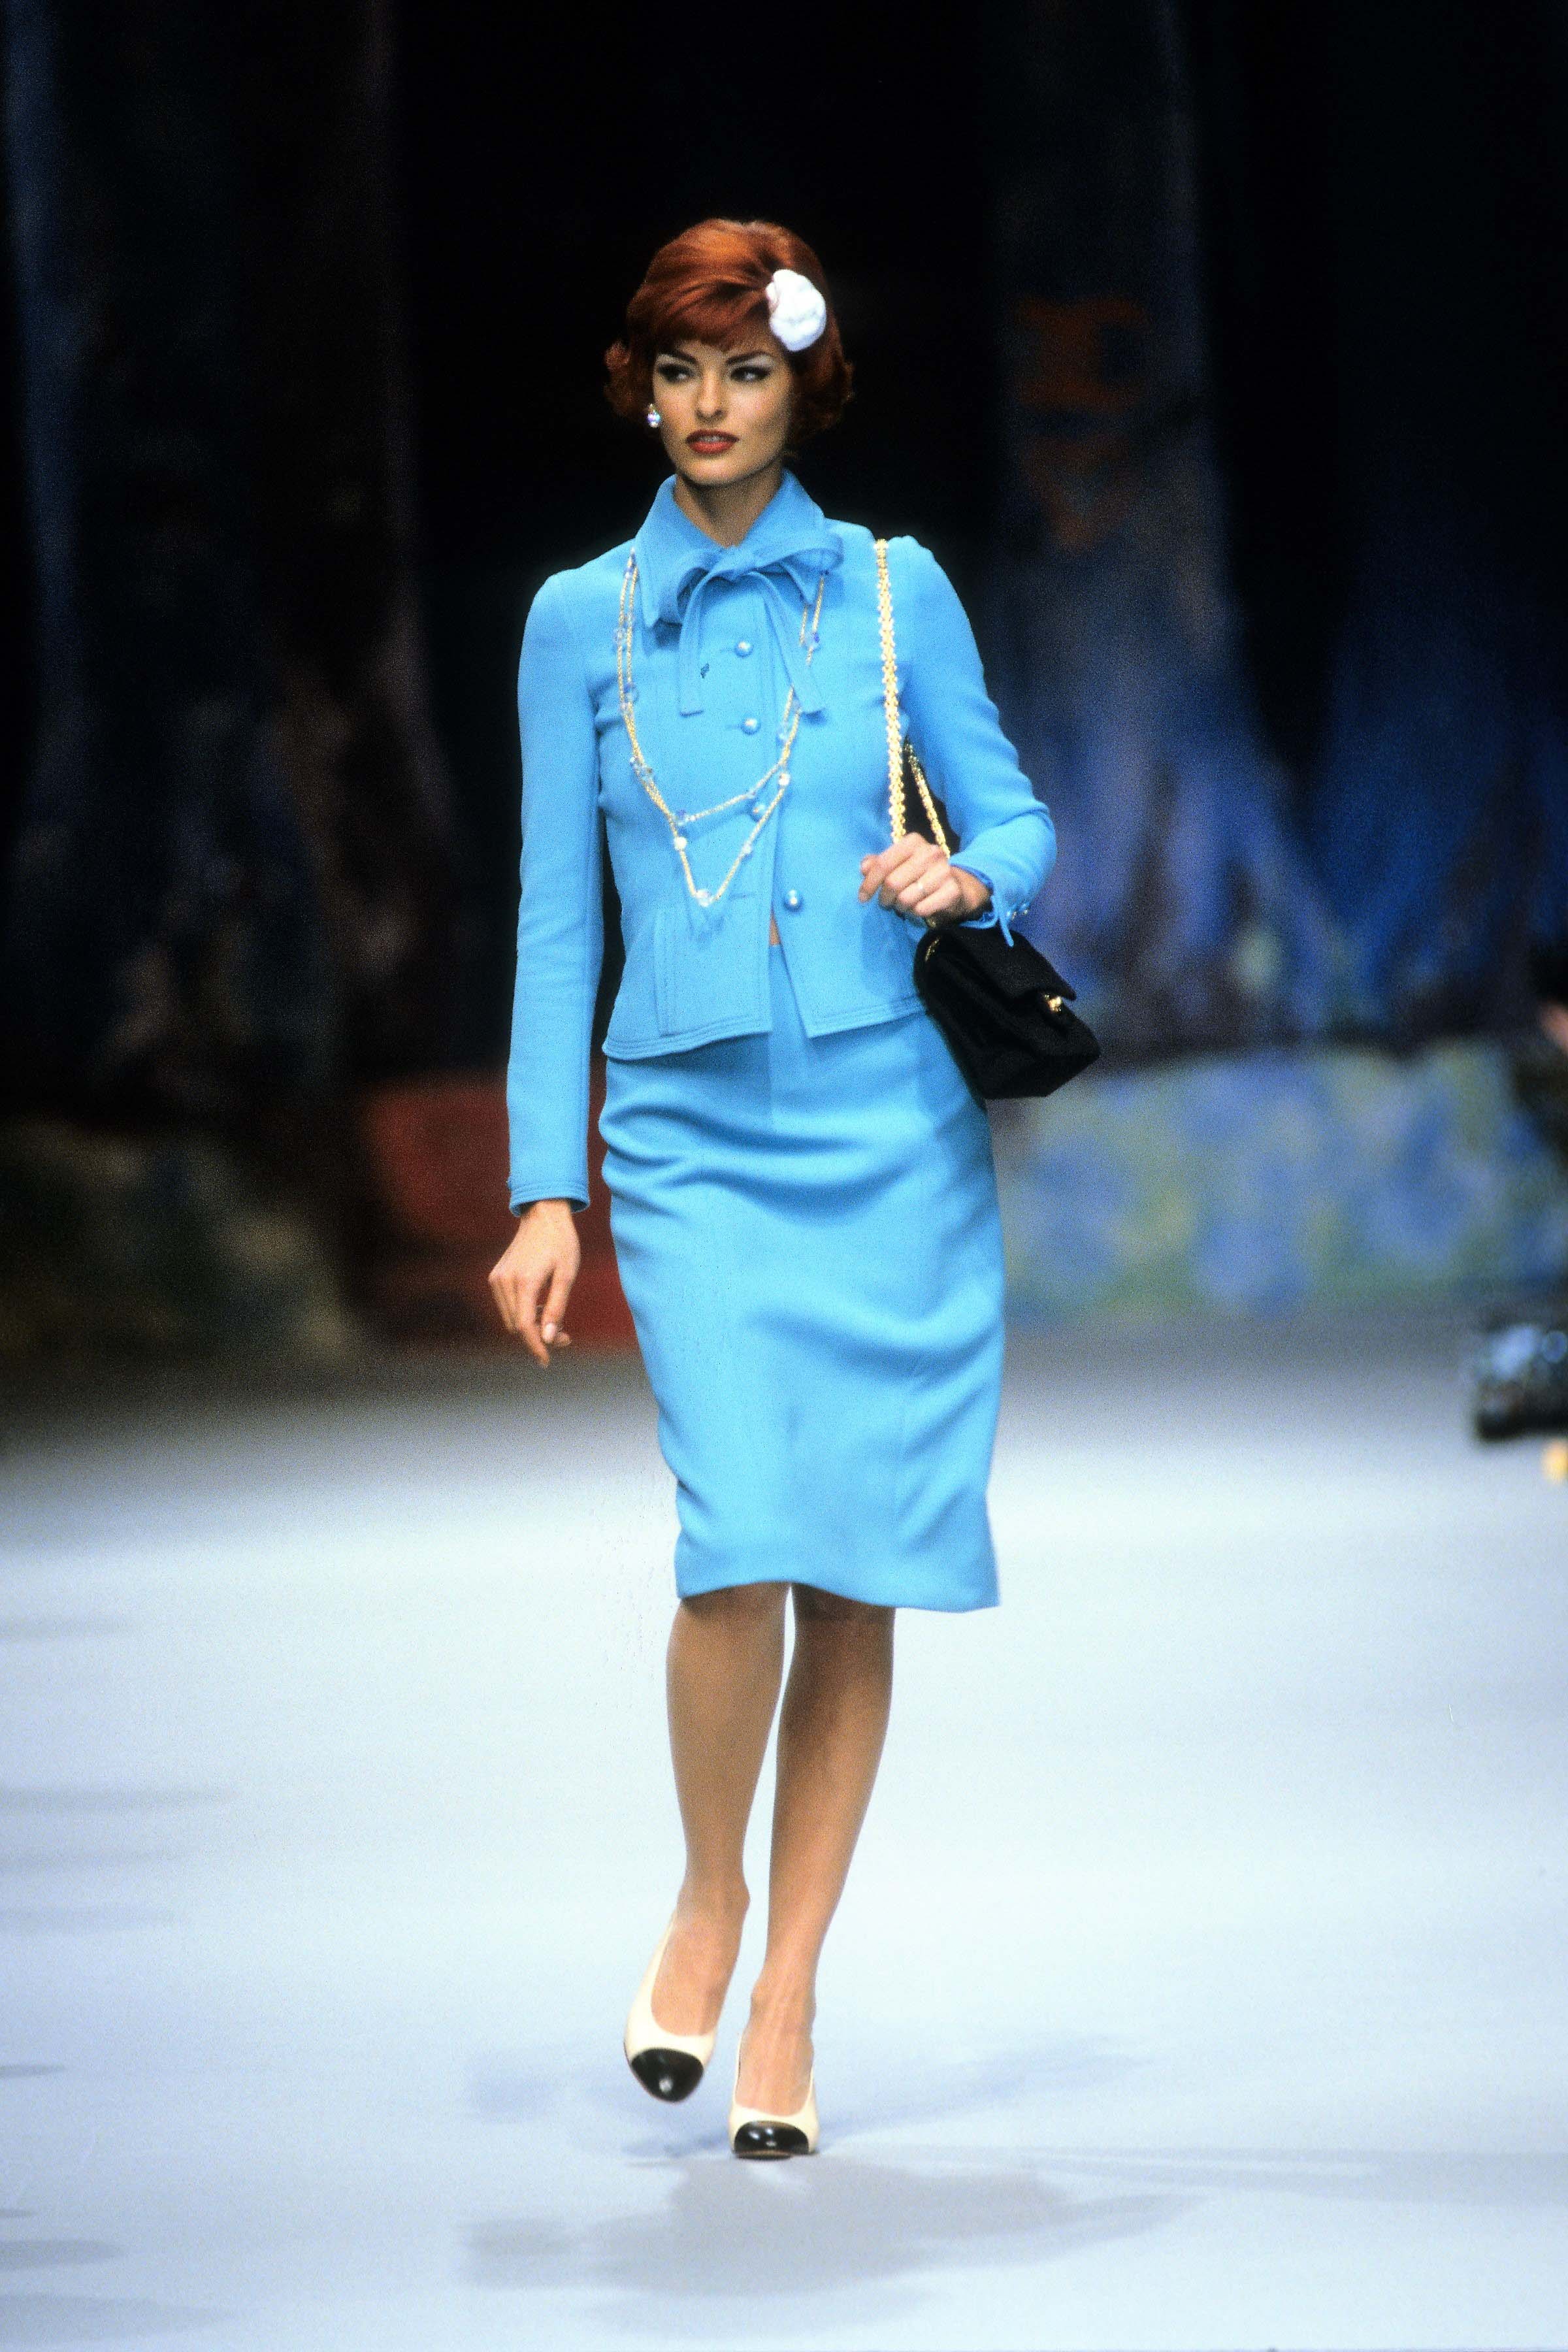 chanel in the 90's - chanel-spring-1992-ready-to-wear-CN10011870-linda-evangelista